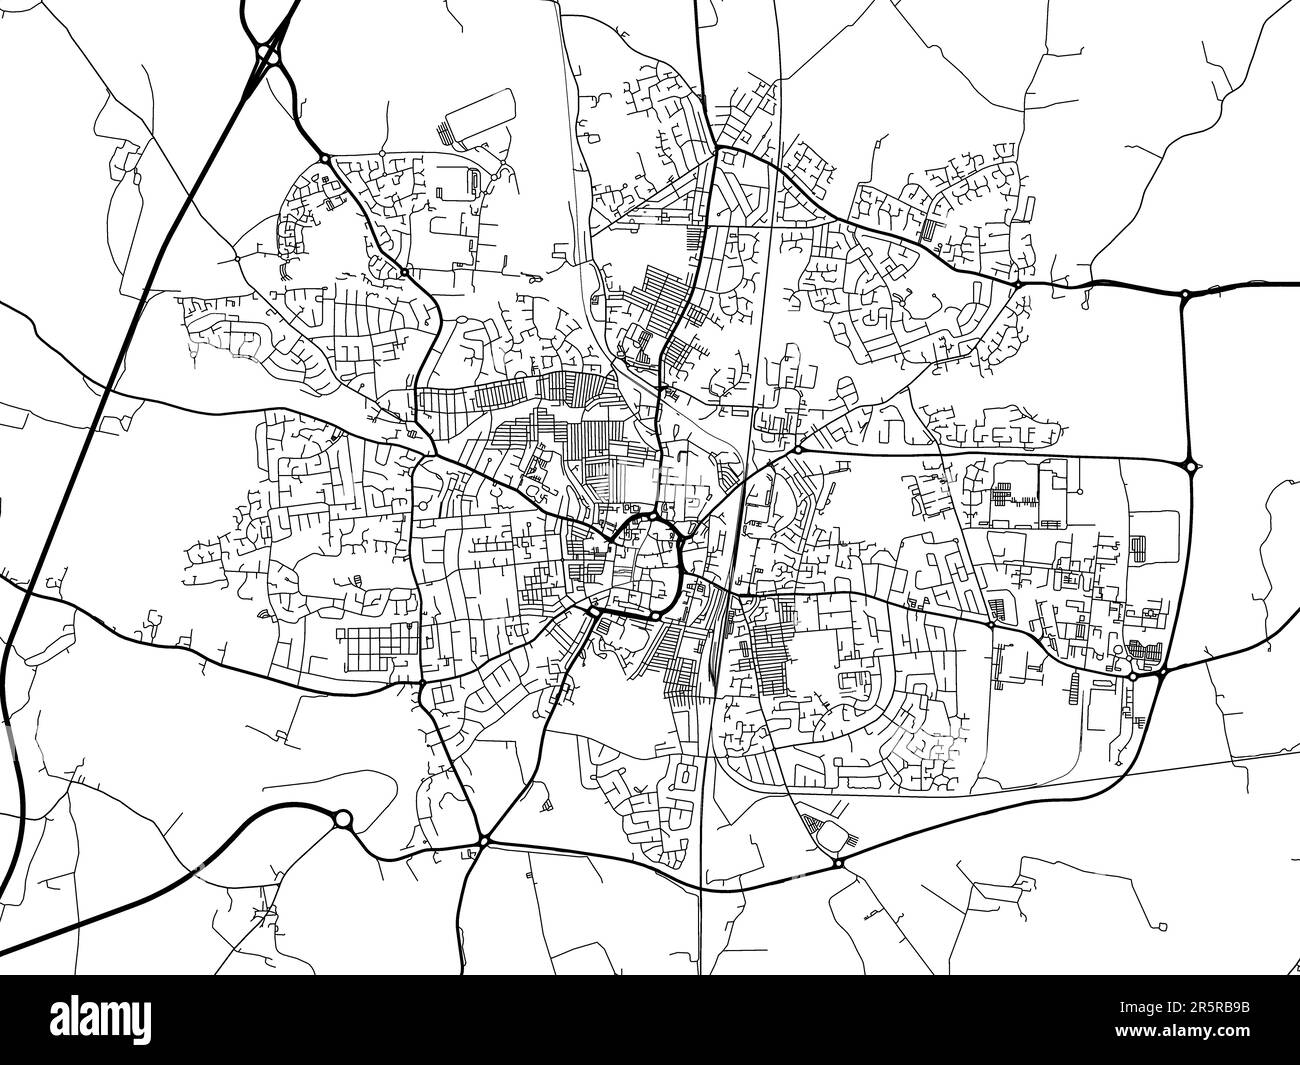 Road map of the city of  Darlington in the United Kingdom on a white background. Stock Photo